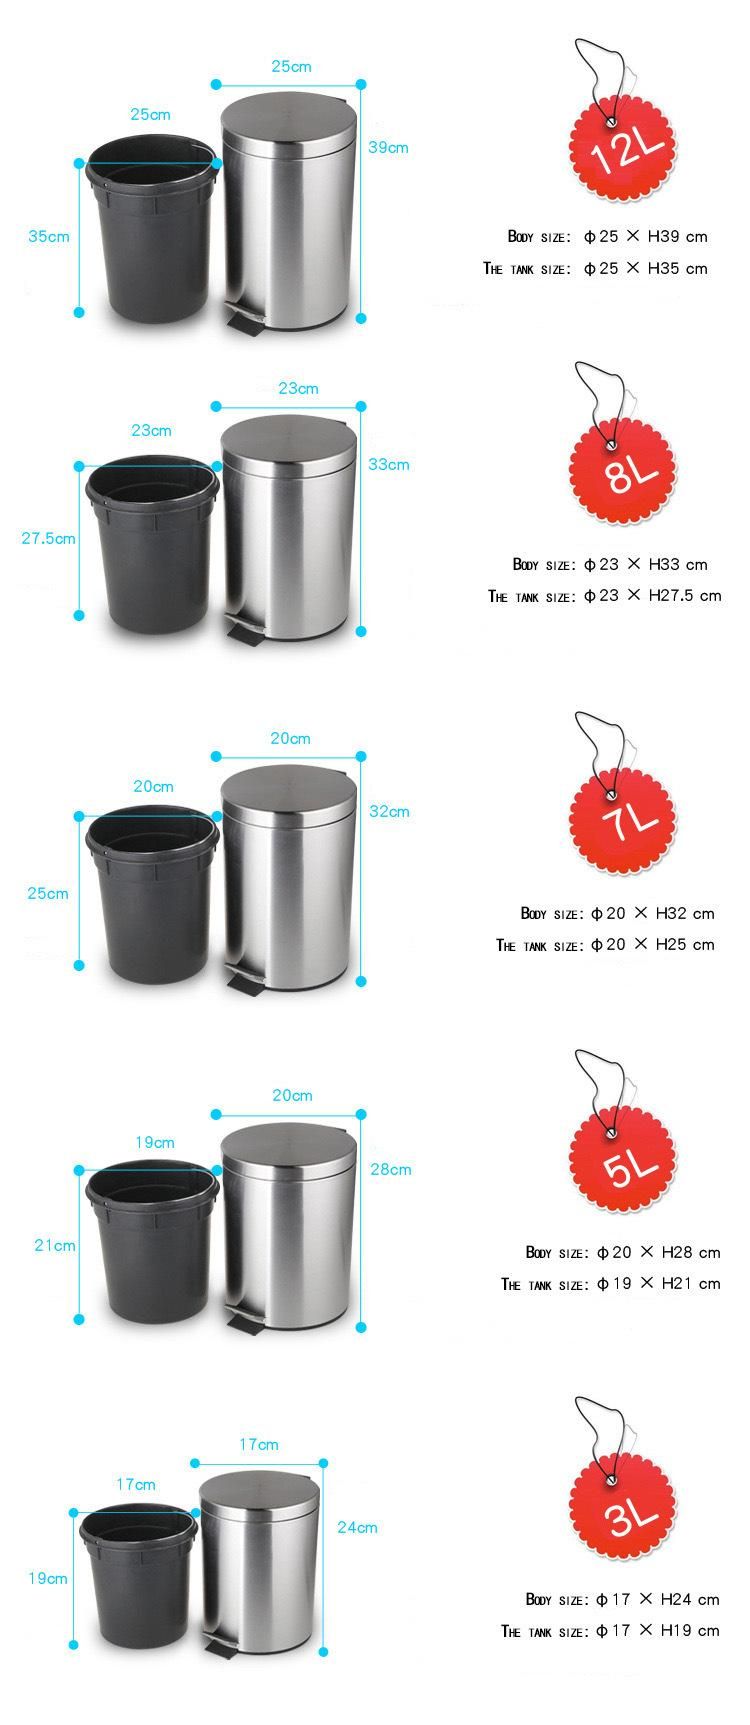 Stainless Steel Pedal Wastebin Dustbin Trash Indoor Room Recycle Gold Color 5L 8L 12L